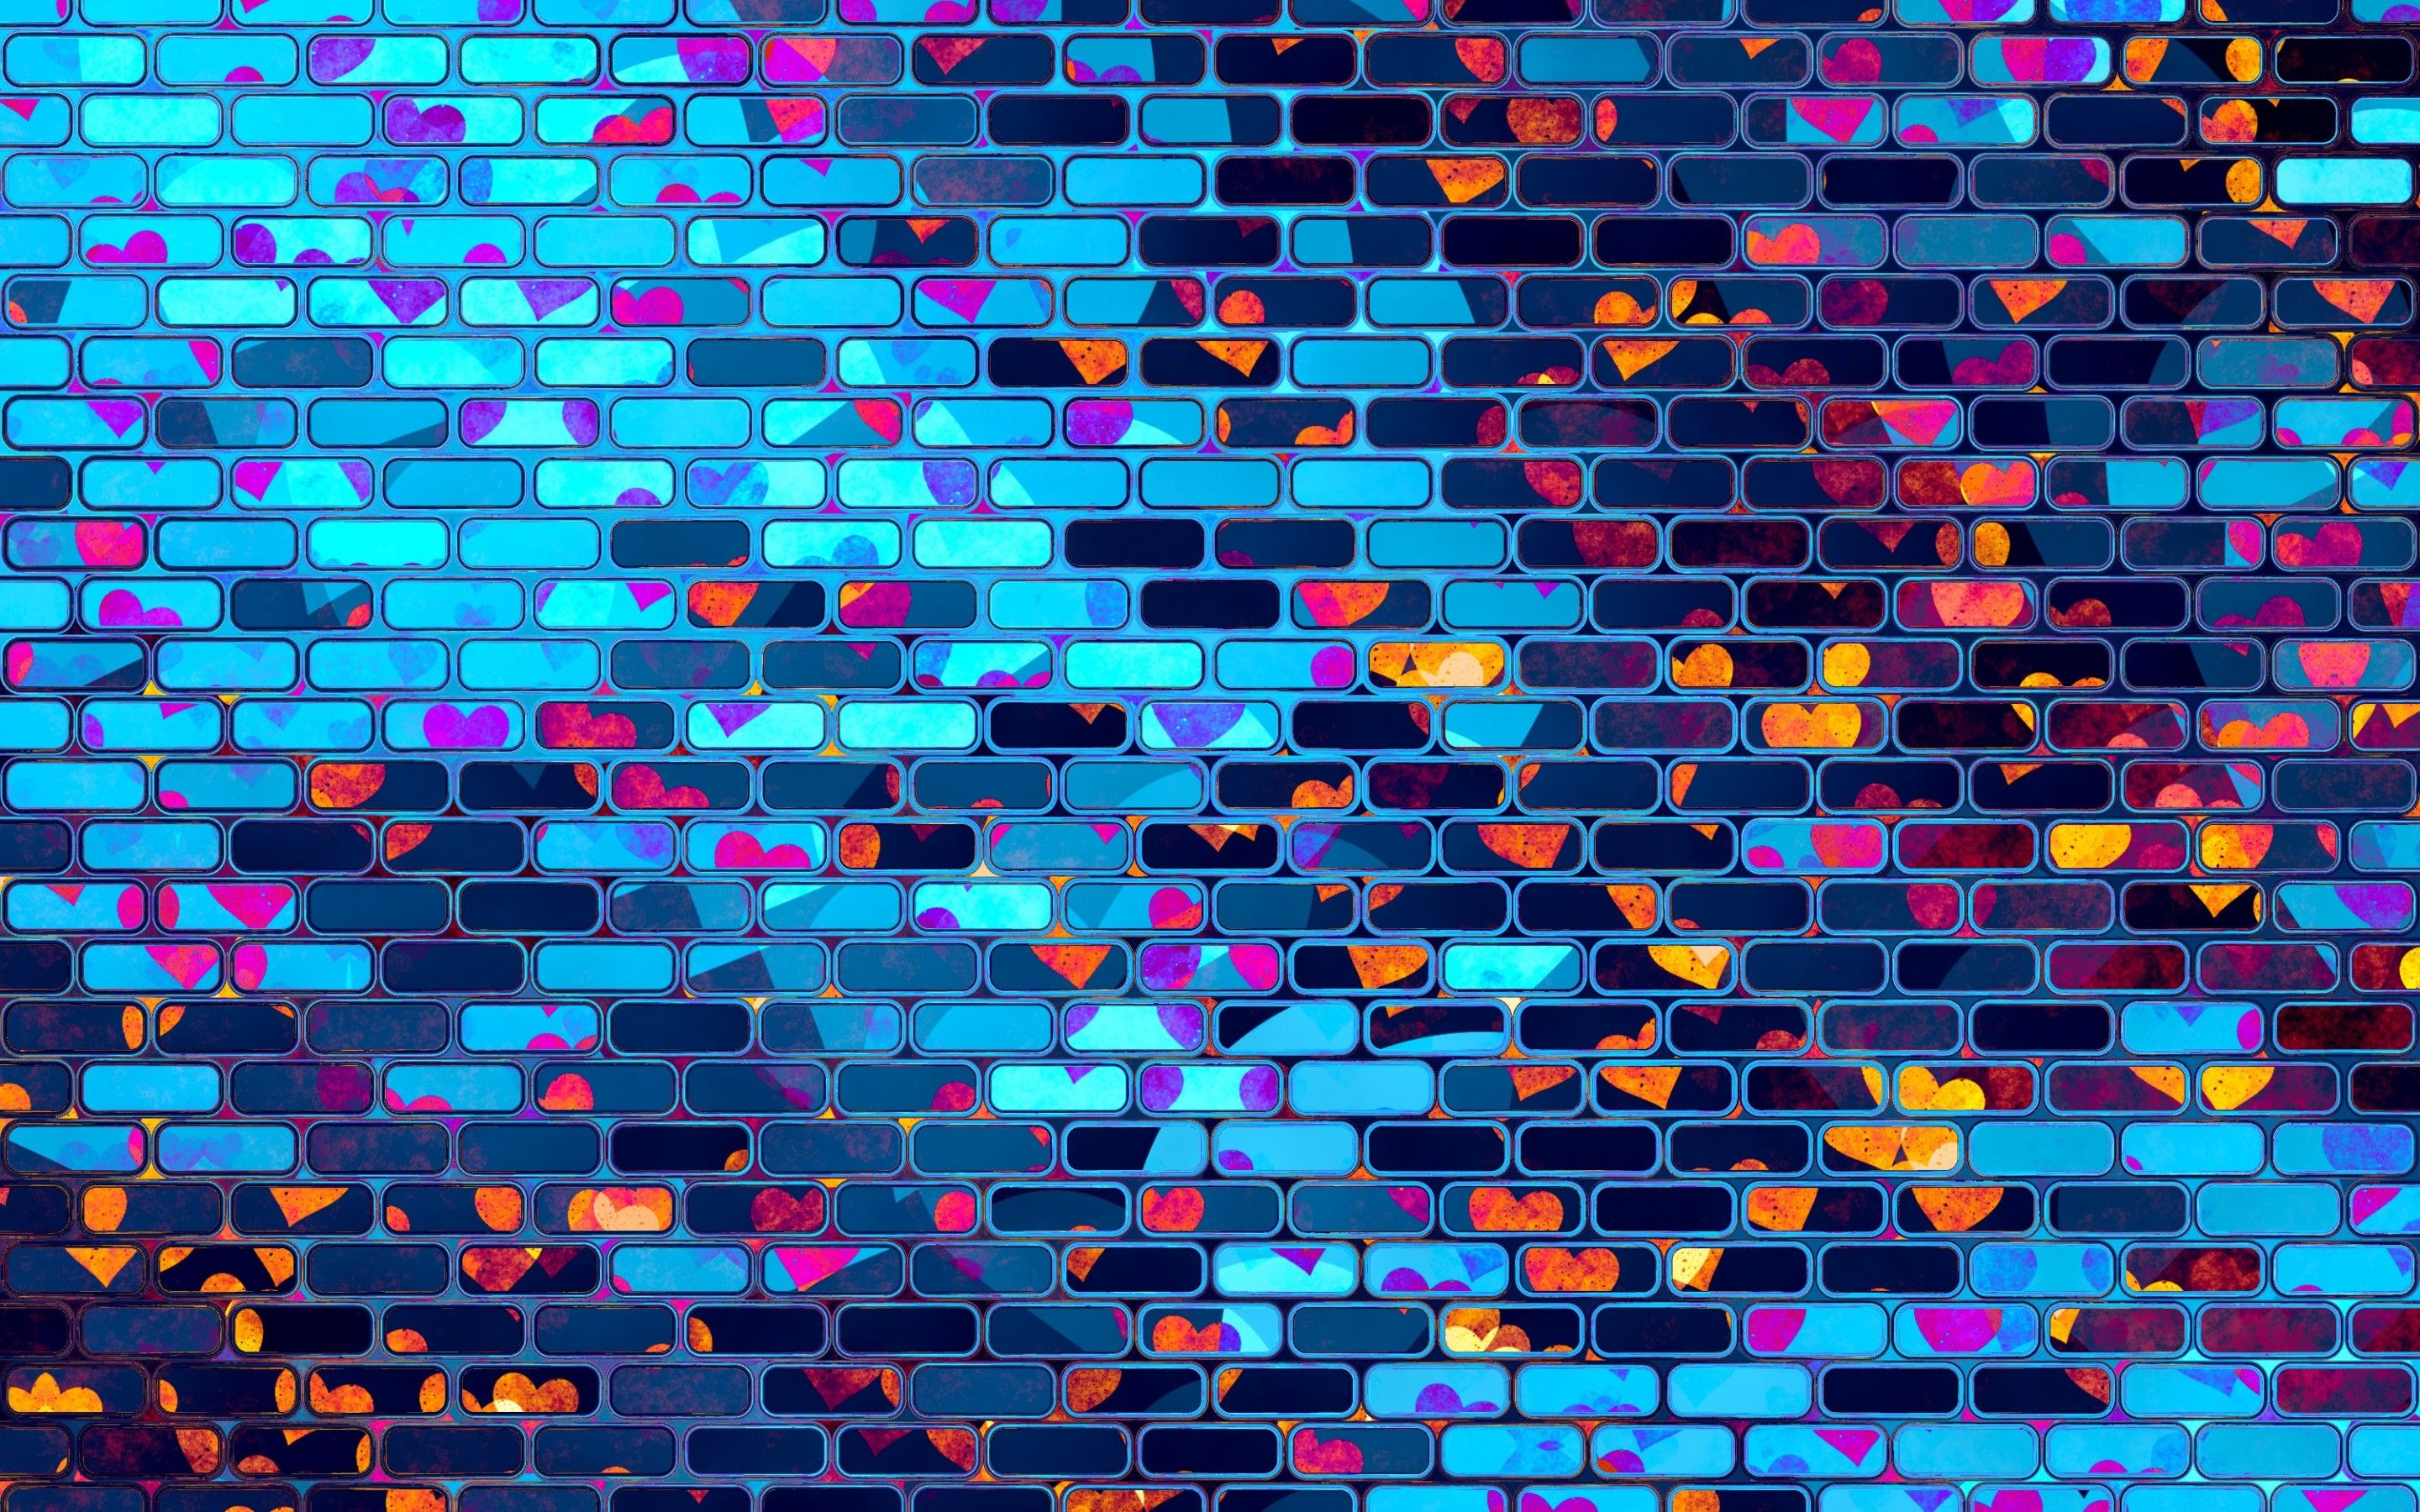 Download wallpaper neon brickwall, 4k, abstract bricks, bricks textures, colorful brick wall, bricks, wall, neon bricks for desktop with resolution 2880x1800. High Quality HD picture wallpaper